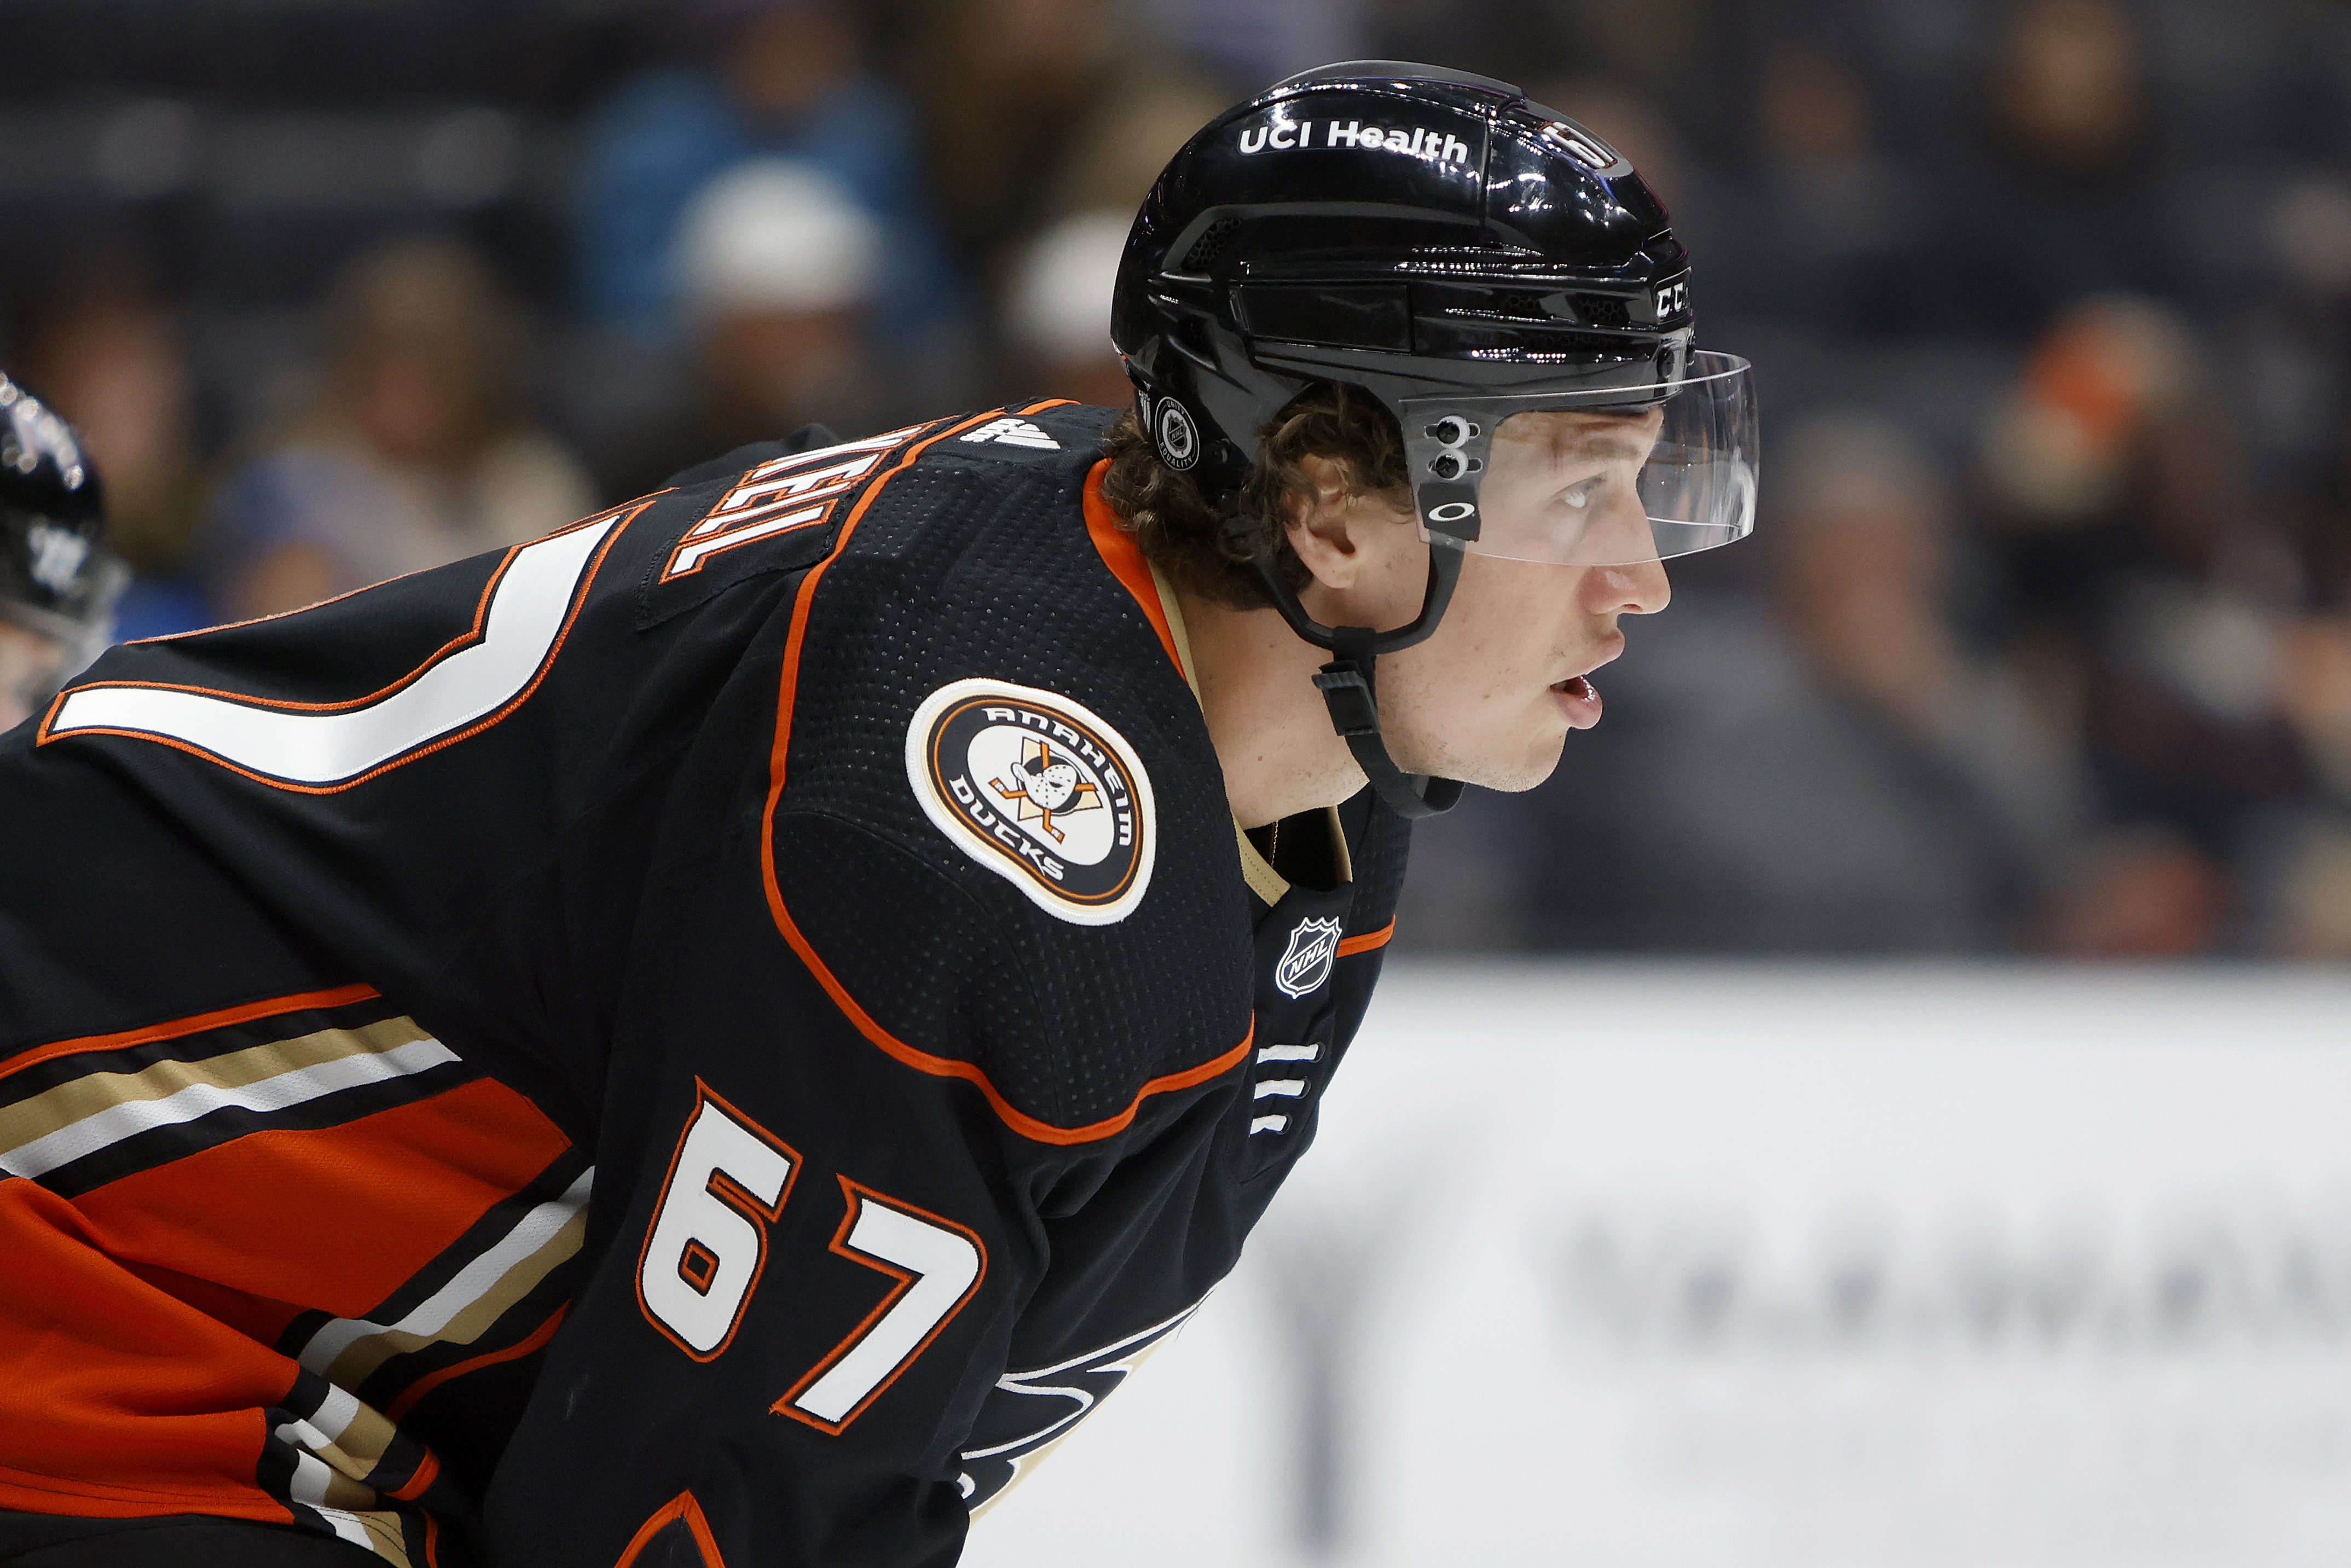 Rickard Rakell #67 of the Anaheim Ducks looks on during the second period of a game against the Winnipeg Jets at Honda Center on October 26, 2021 in Anaheim, California.